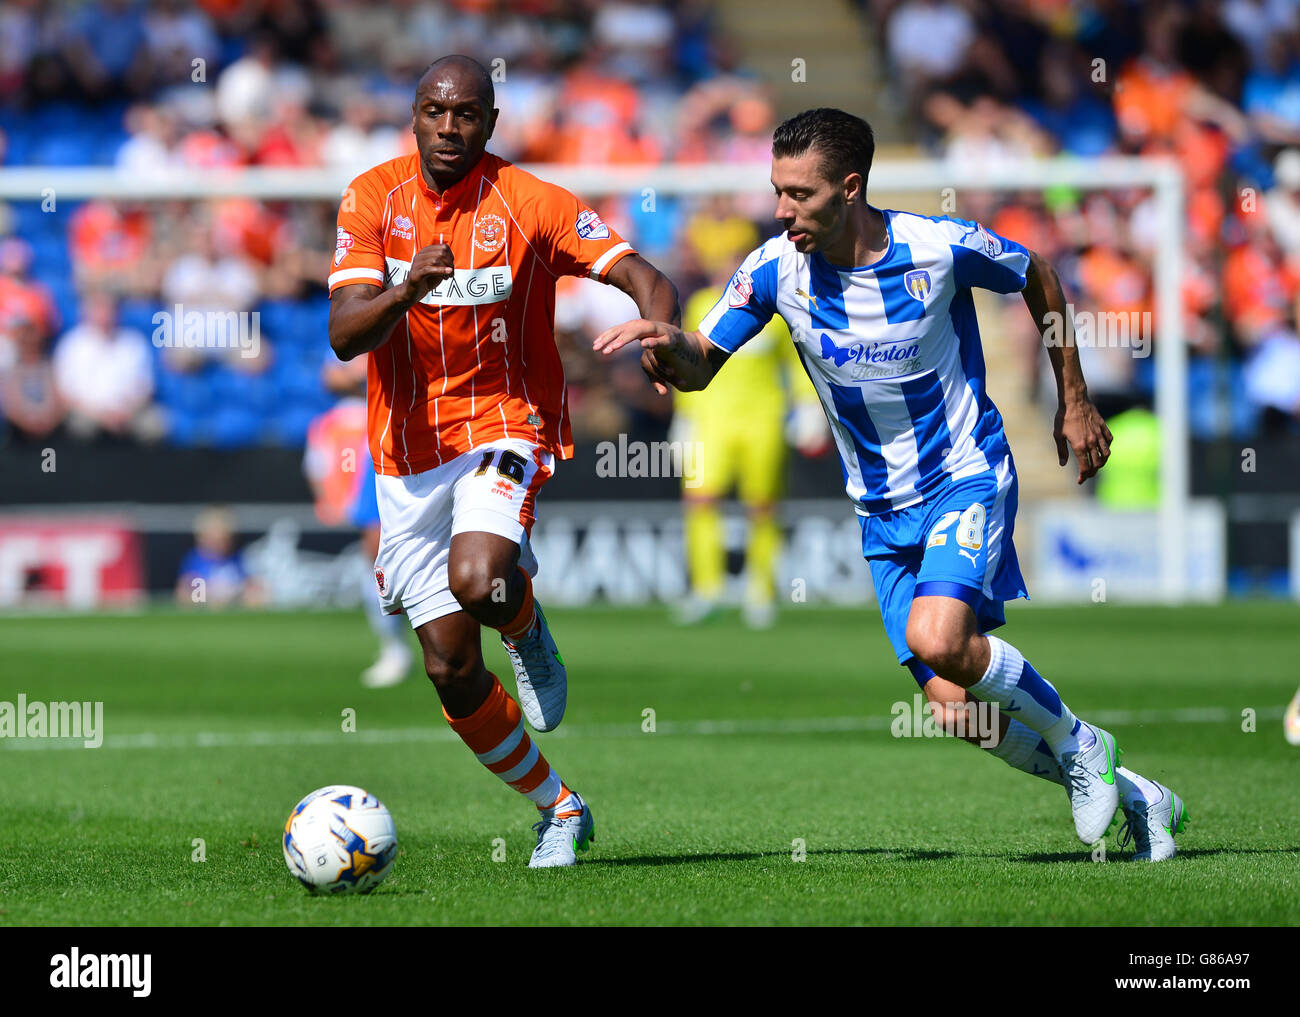 Soccer - Sky Bet League One - Colchester United v Blackpool FC - Weston Homes Community Stadium. Blackpool's Emmerson Boyce (left) and Colchester United's Darren Ambrose (right) battle for the ball Stock Photo